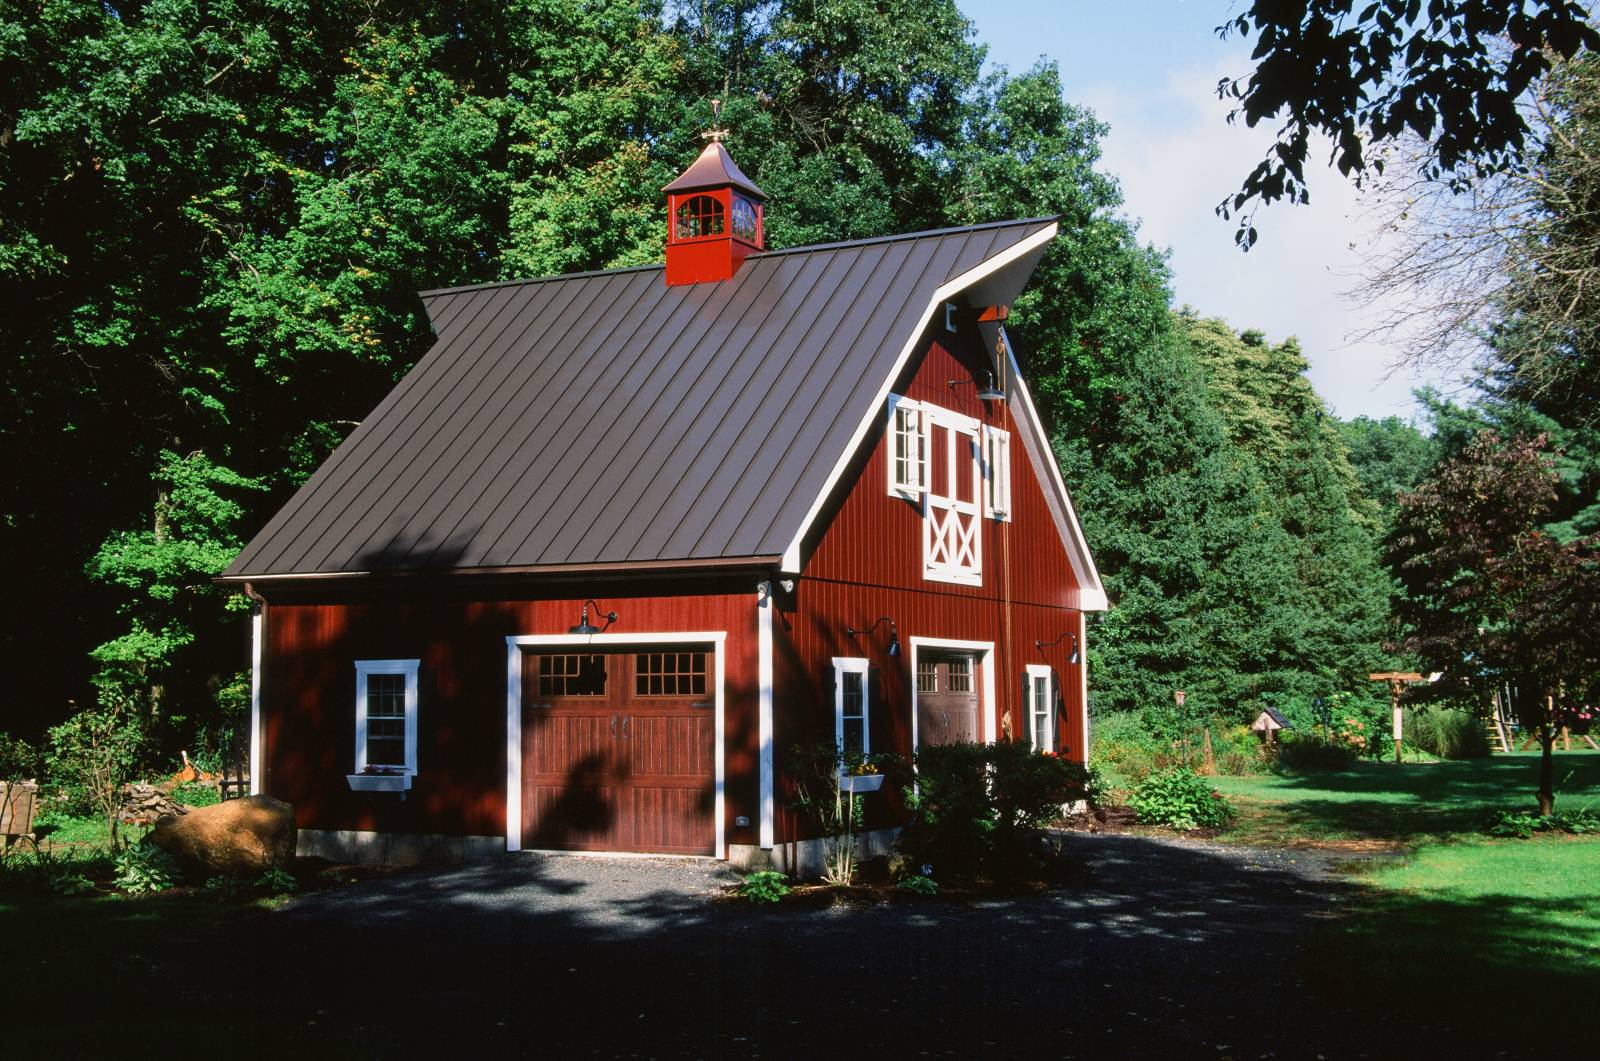 Barn Garage with (2) Cow Catcher Gable Peaks • Standing Seam Metal Roof • Mahogany Carriage Style Overhead Doors